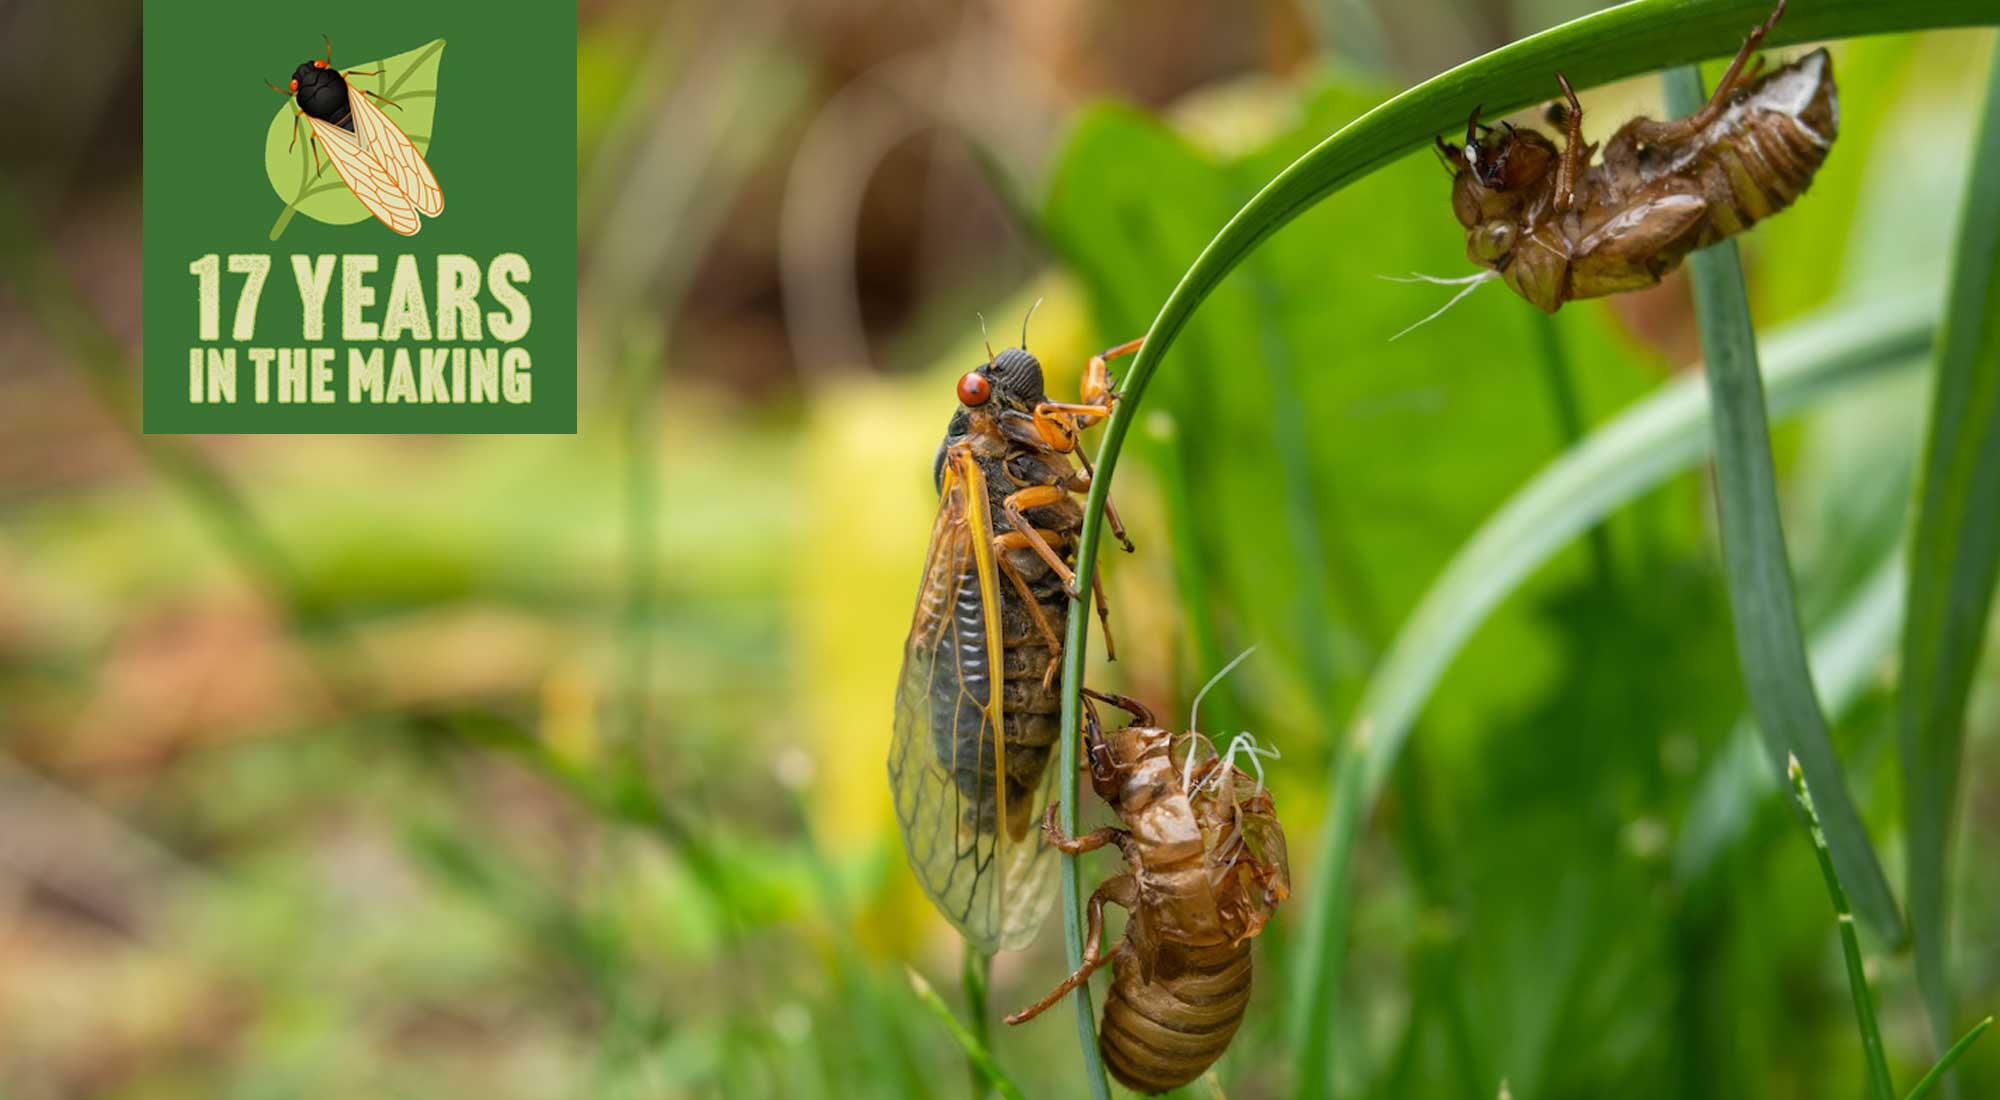 A cicada and two cicada exoskeletons on a blade of grass.